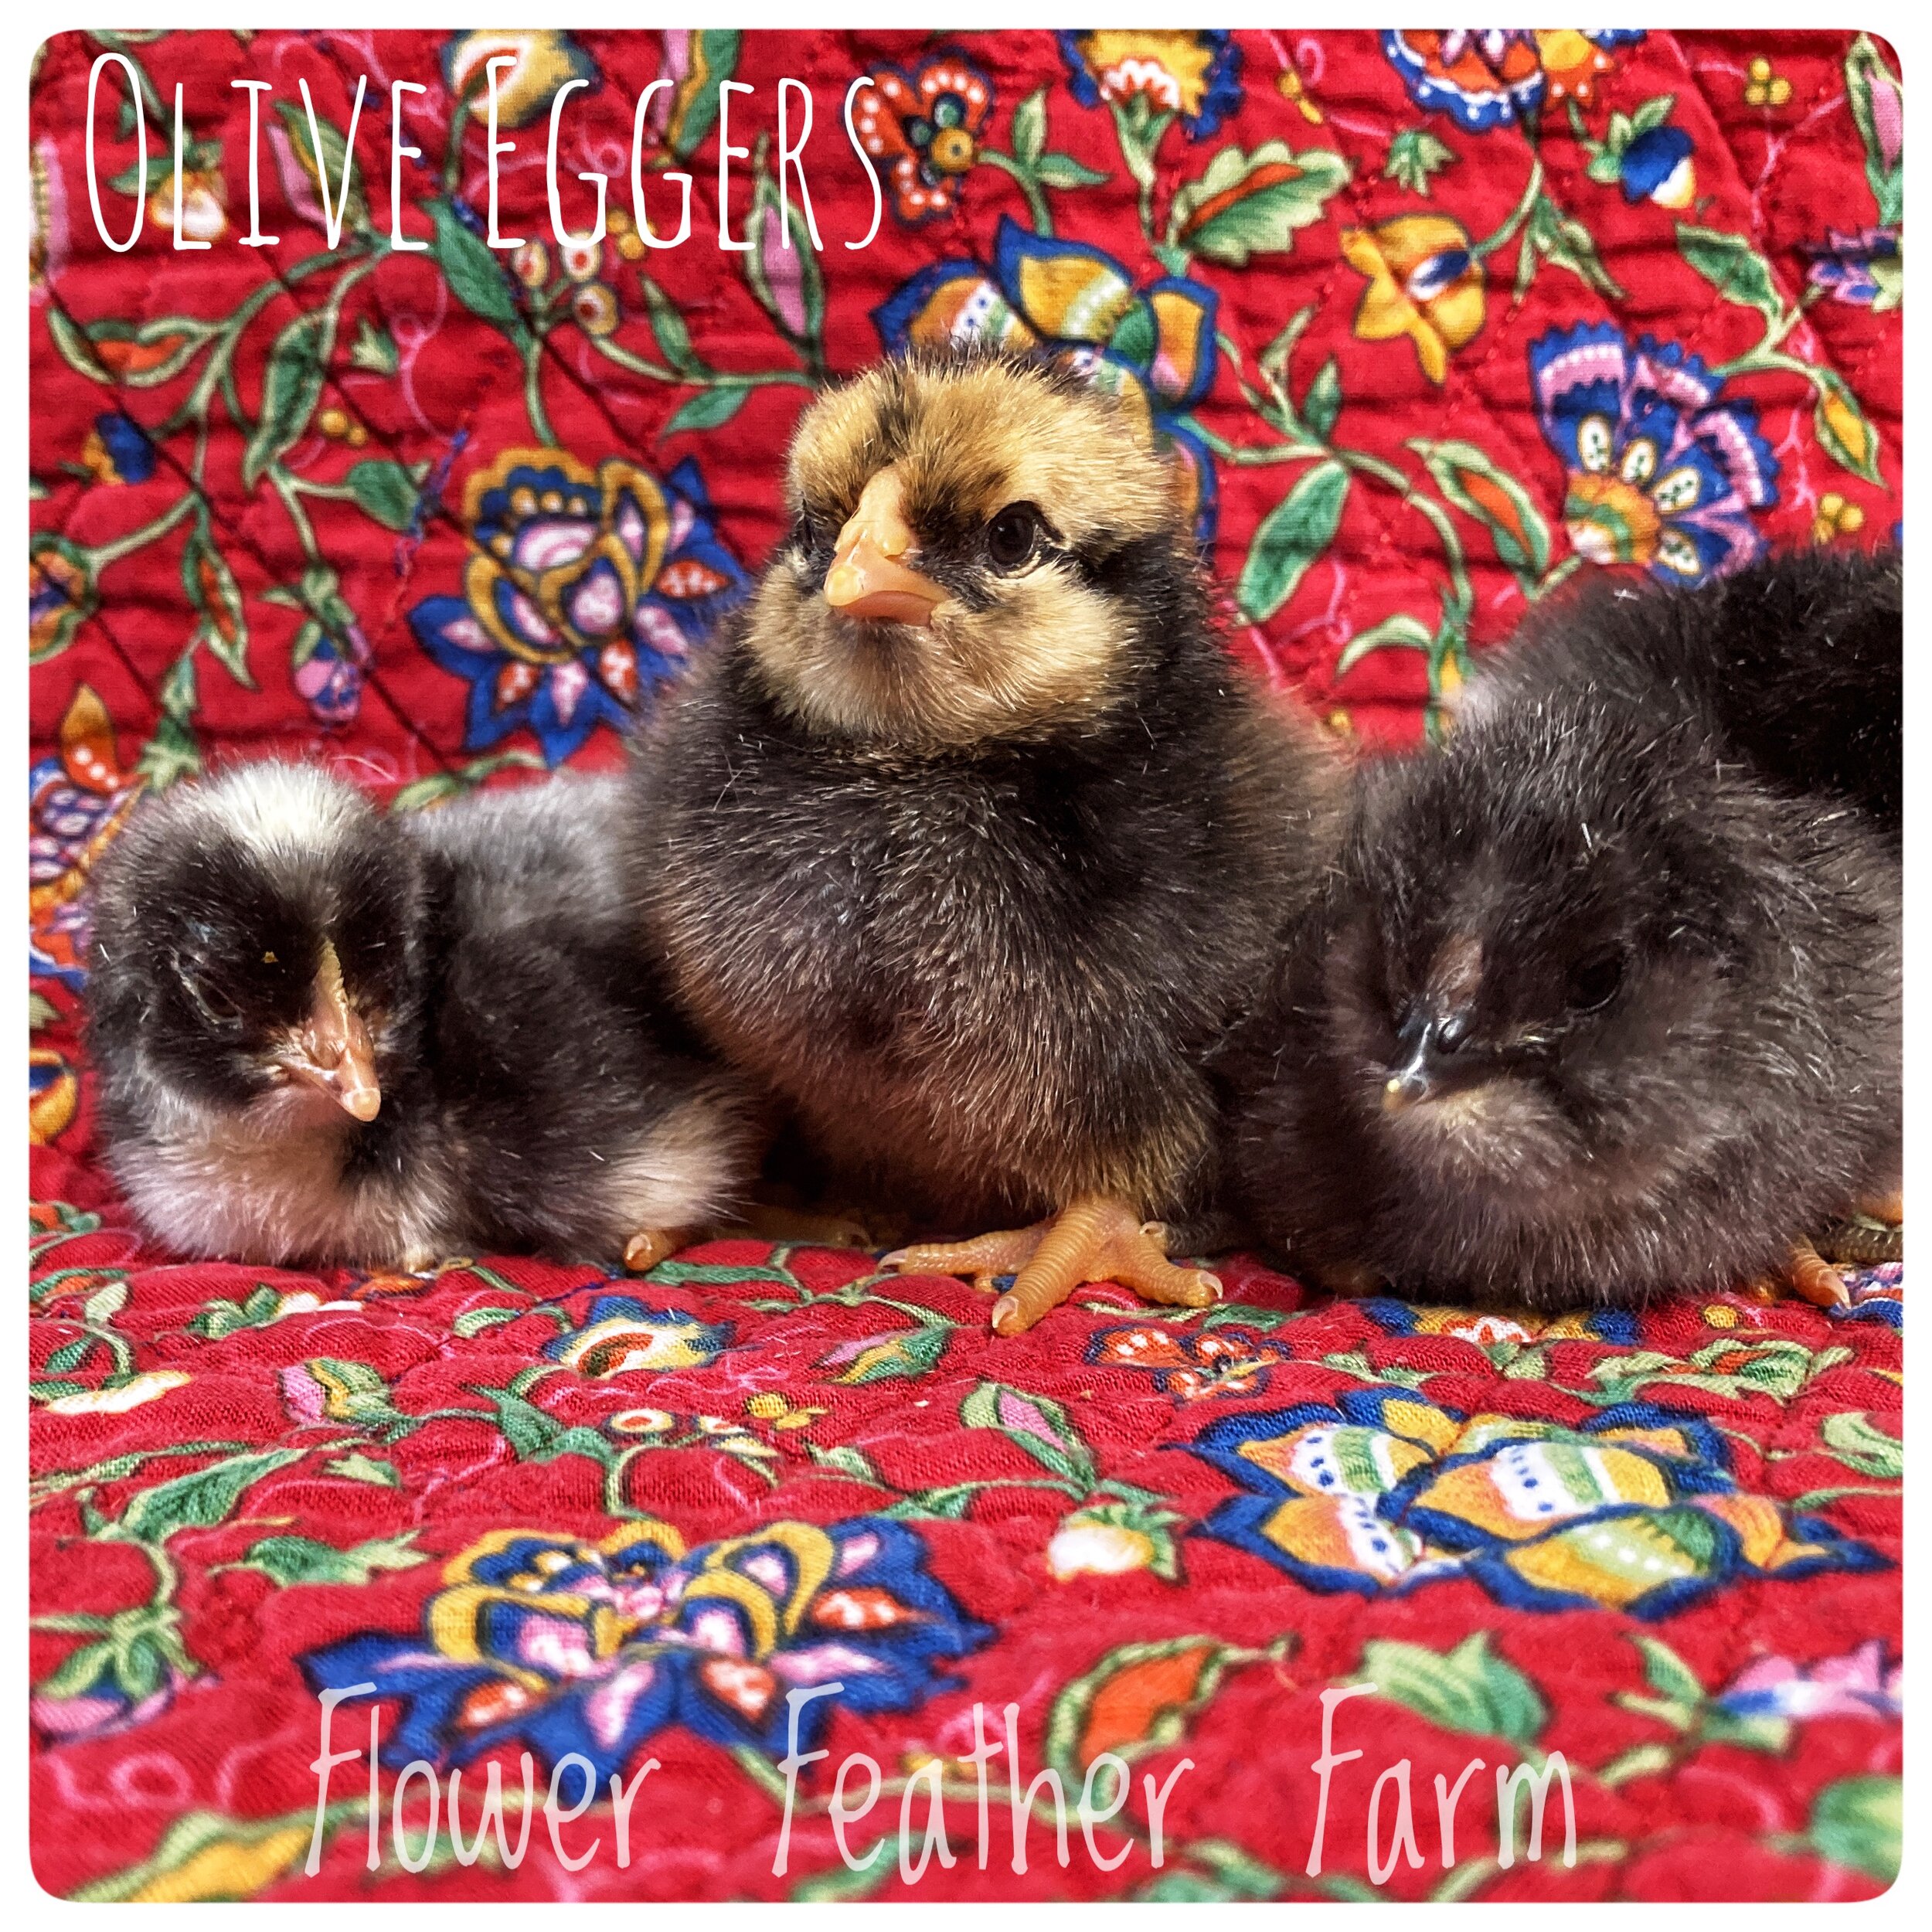 Olive Egger Chicks at Flower Feather Farm, Specialty Chicks and Dahlias